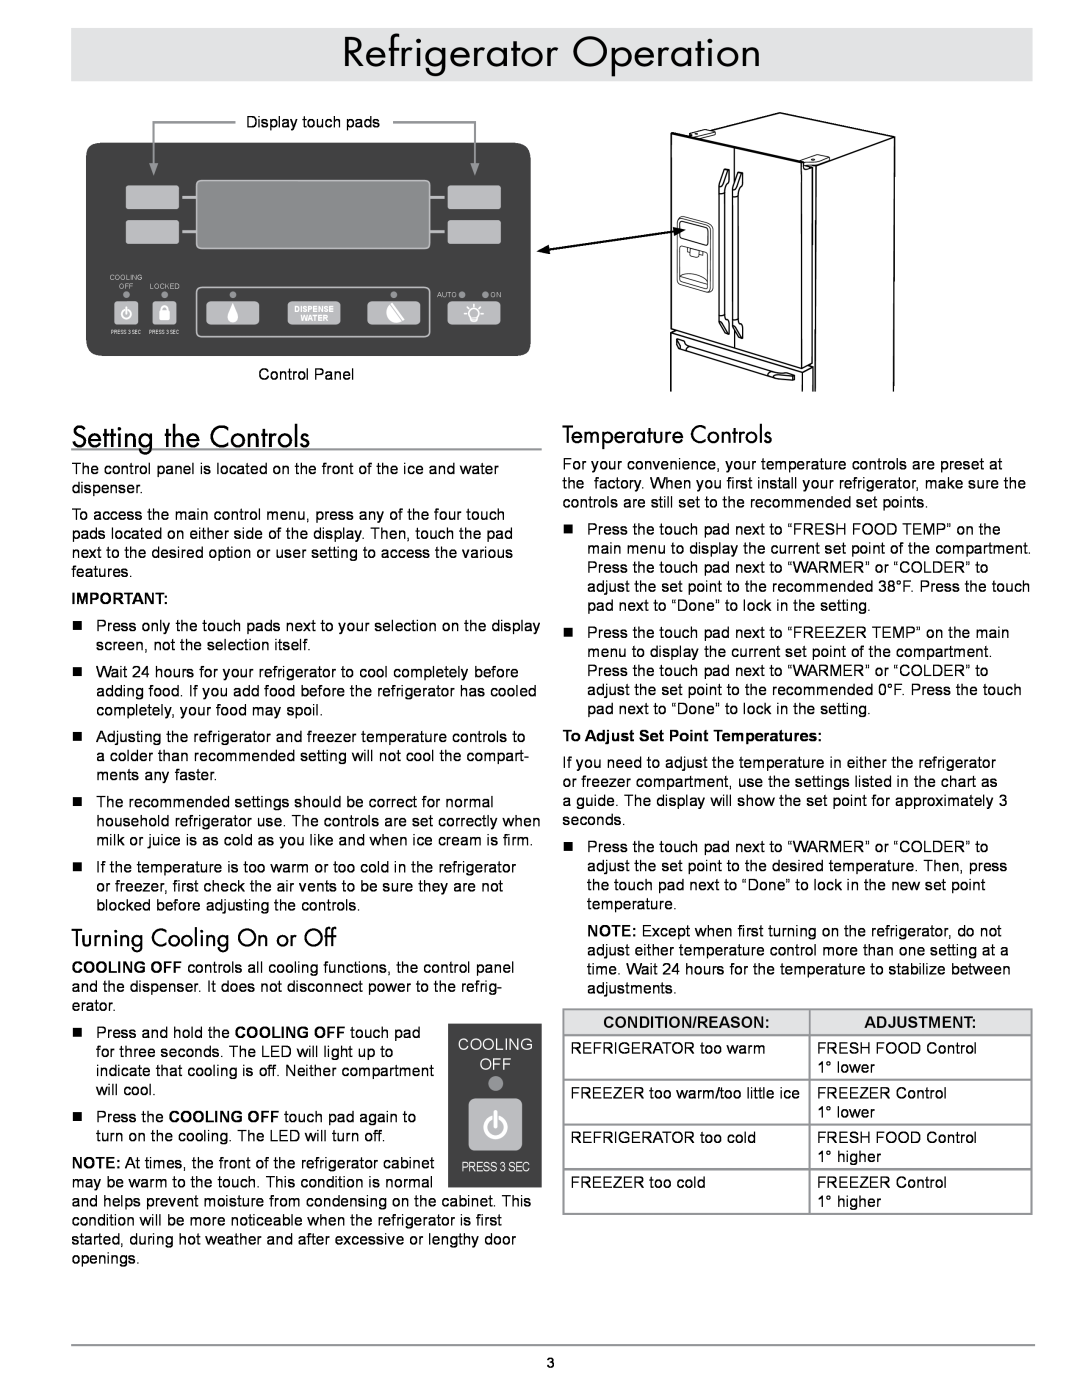 Dacor EF36IWF Setting the Controls, Turning Cooling On or Off, Temperature Controls, Refrigerator Operation, Adjustment 